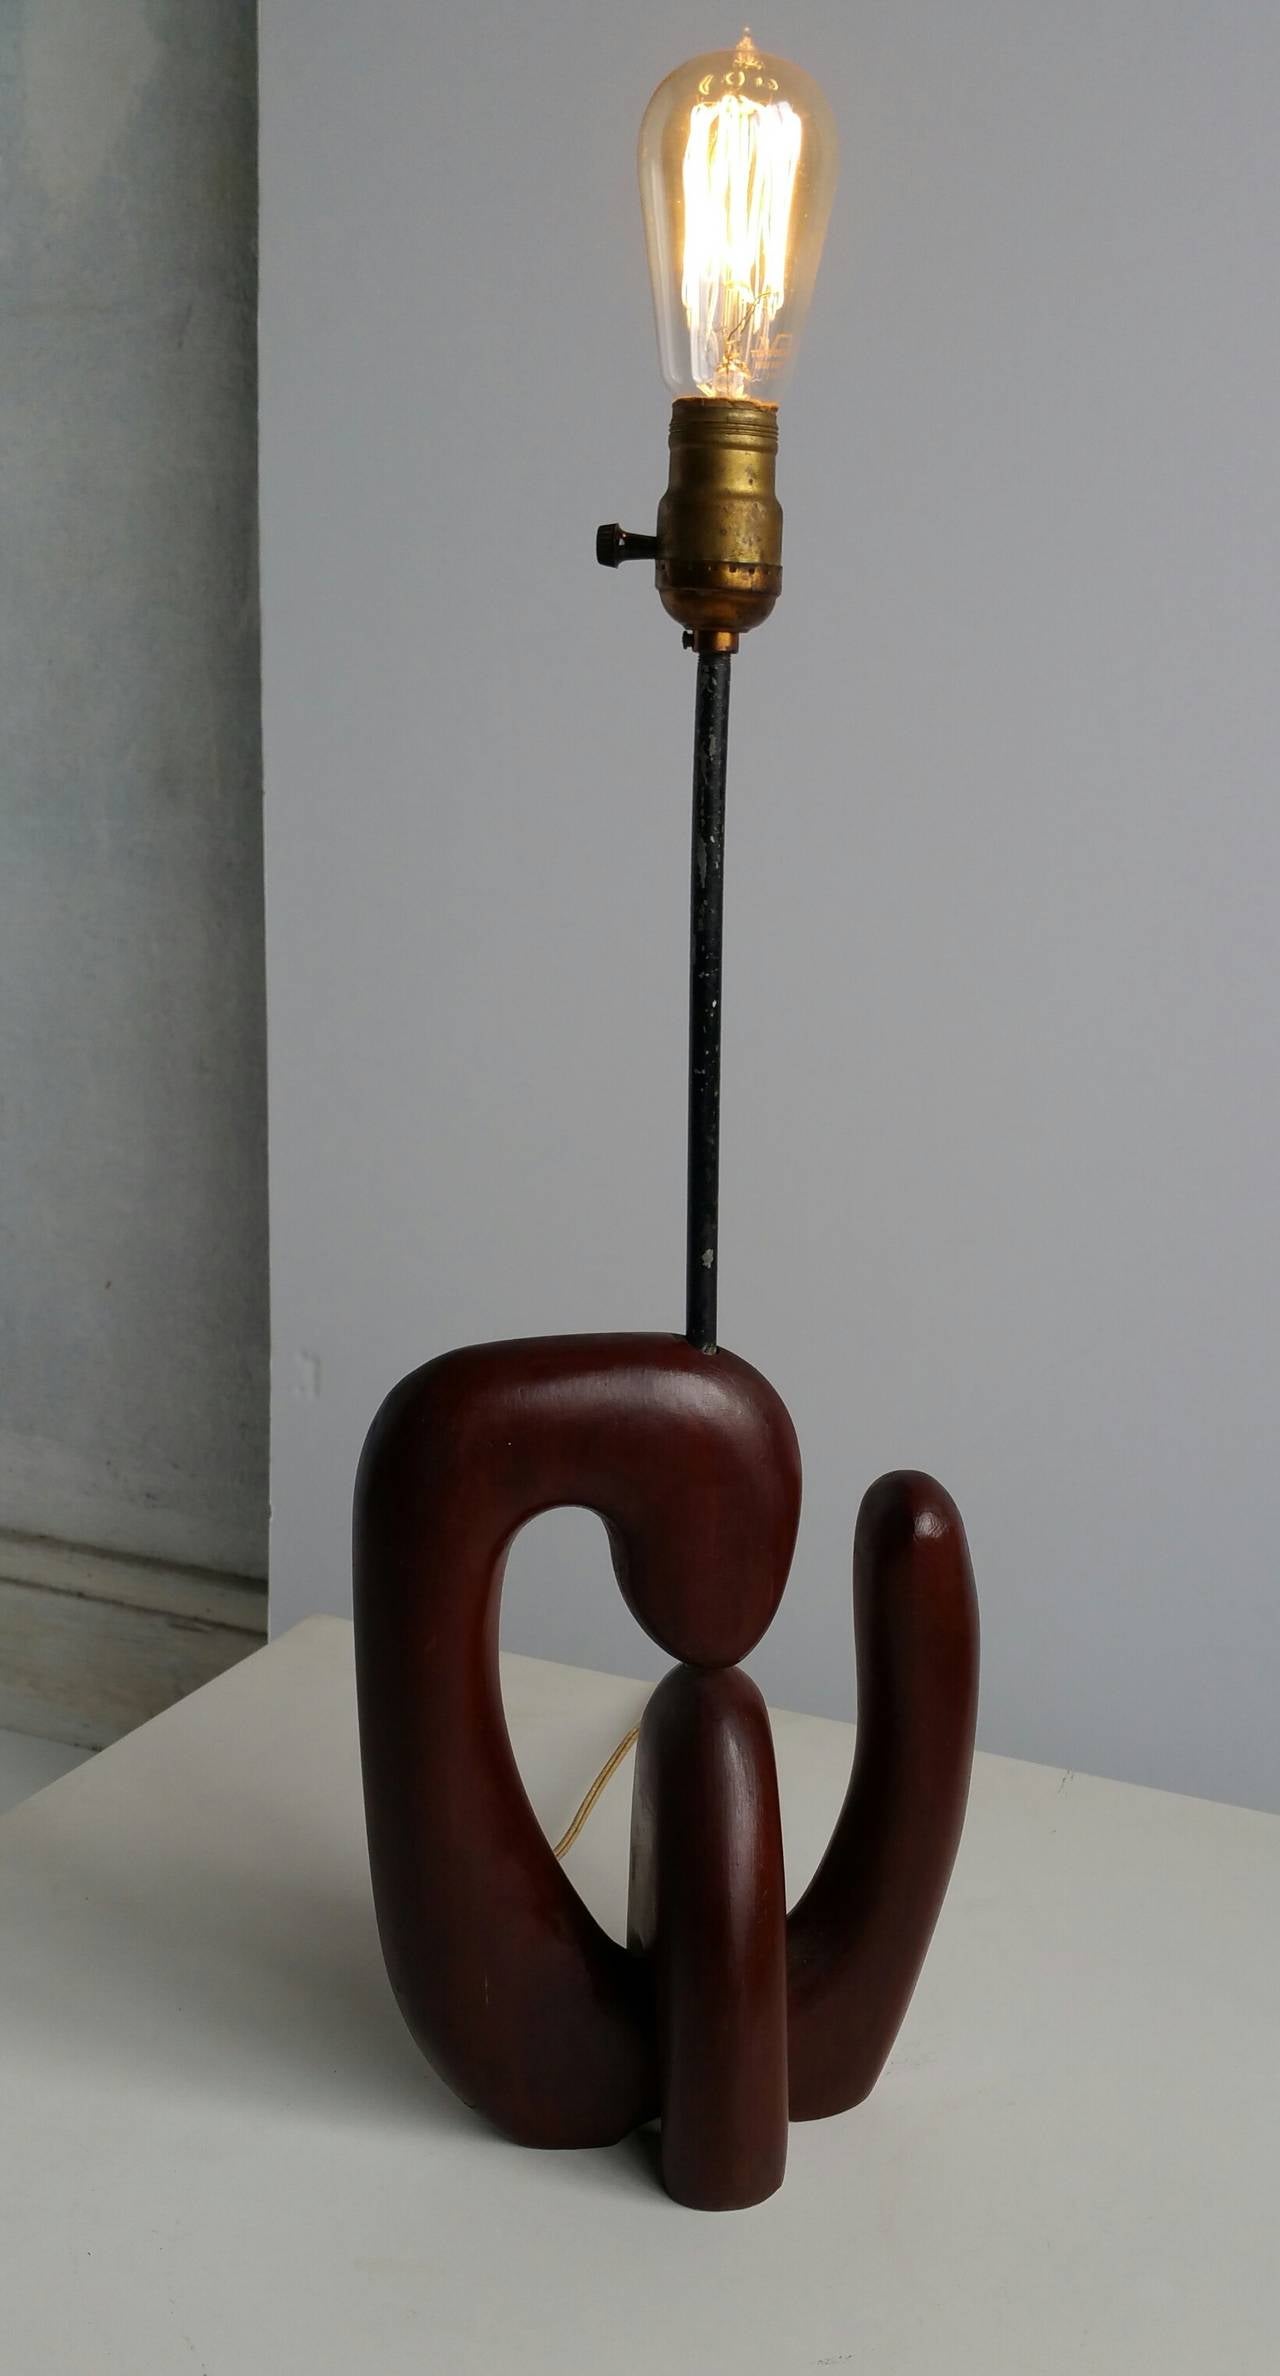 1950s Period Sculptural wood and brass table lamp.. Reminiscent of the Classic Modern forms by Noguchi,Henry Moore